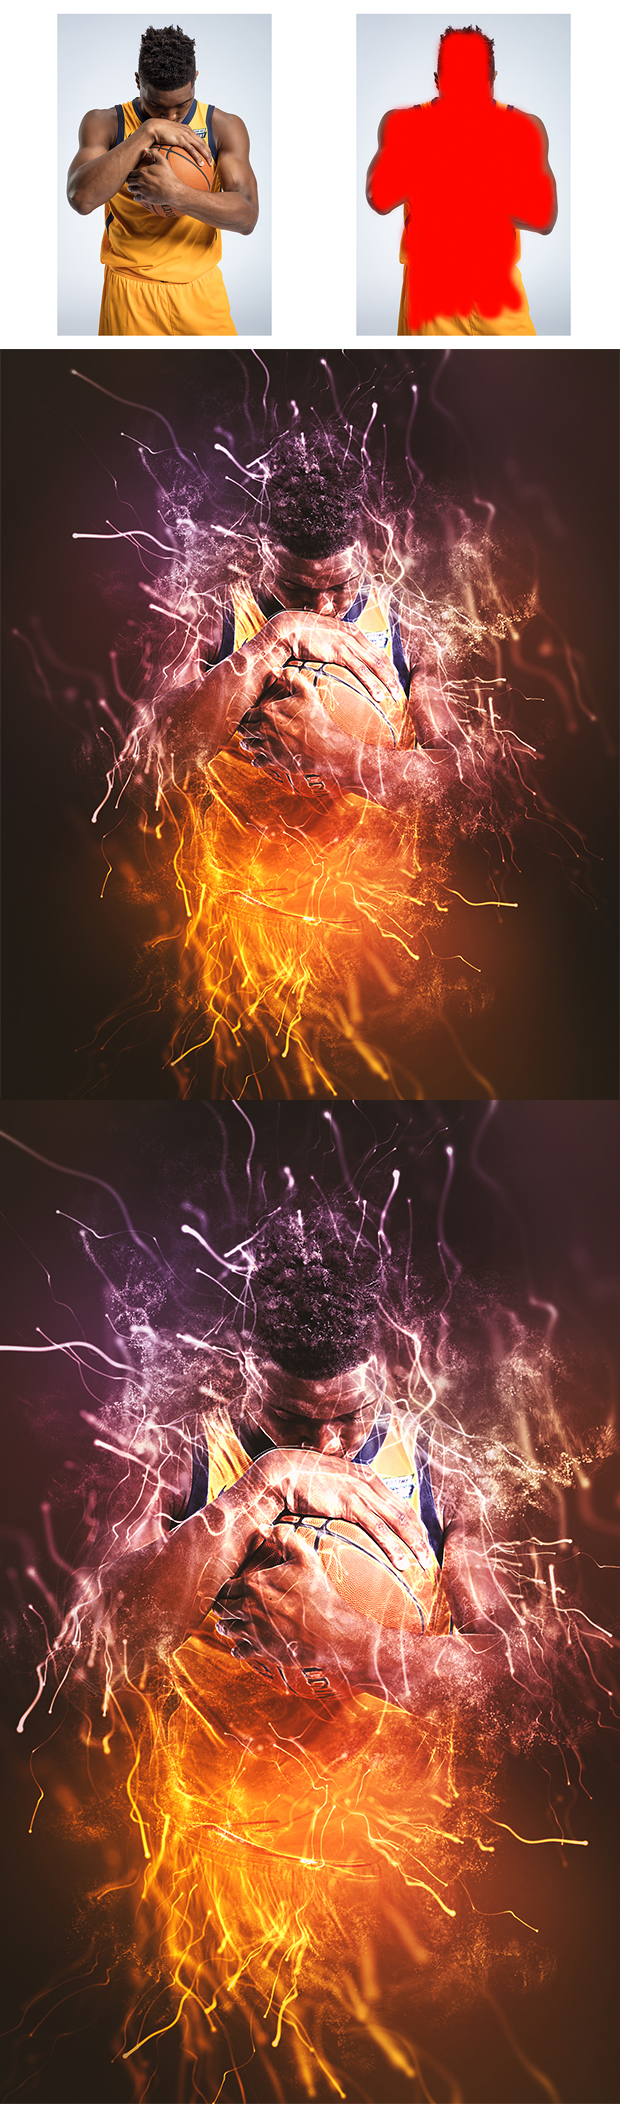 GIF动画粒子爆炸的Photoshop行动 Gif Animated Particle Explosion Photoshop Action插图10